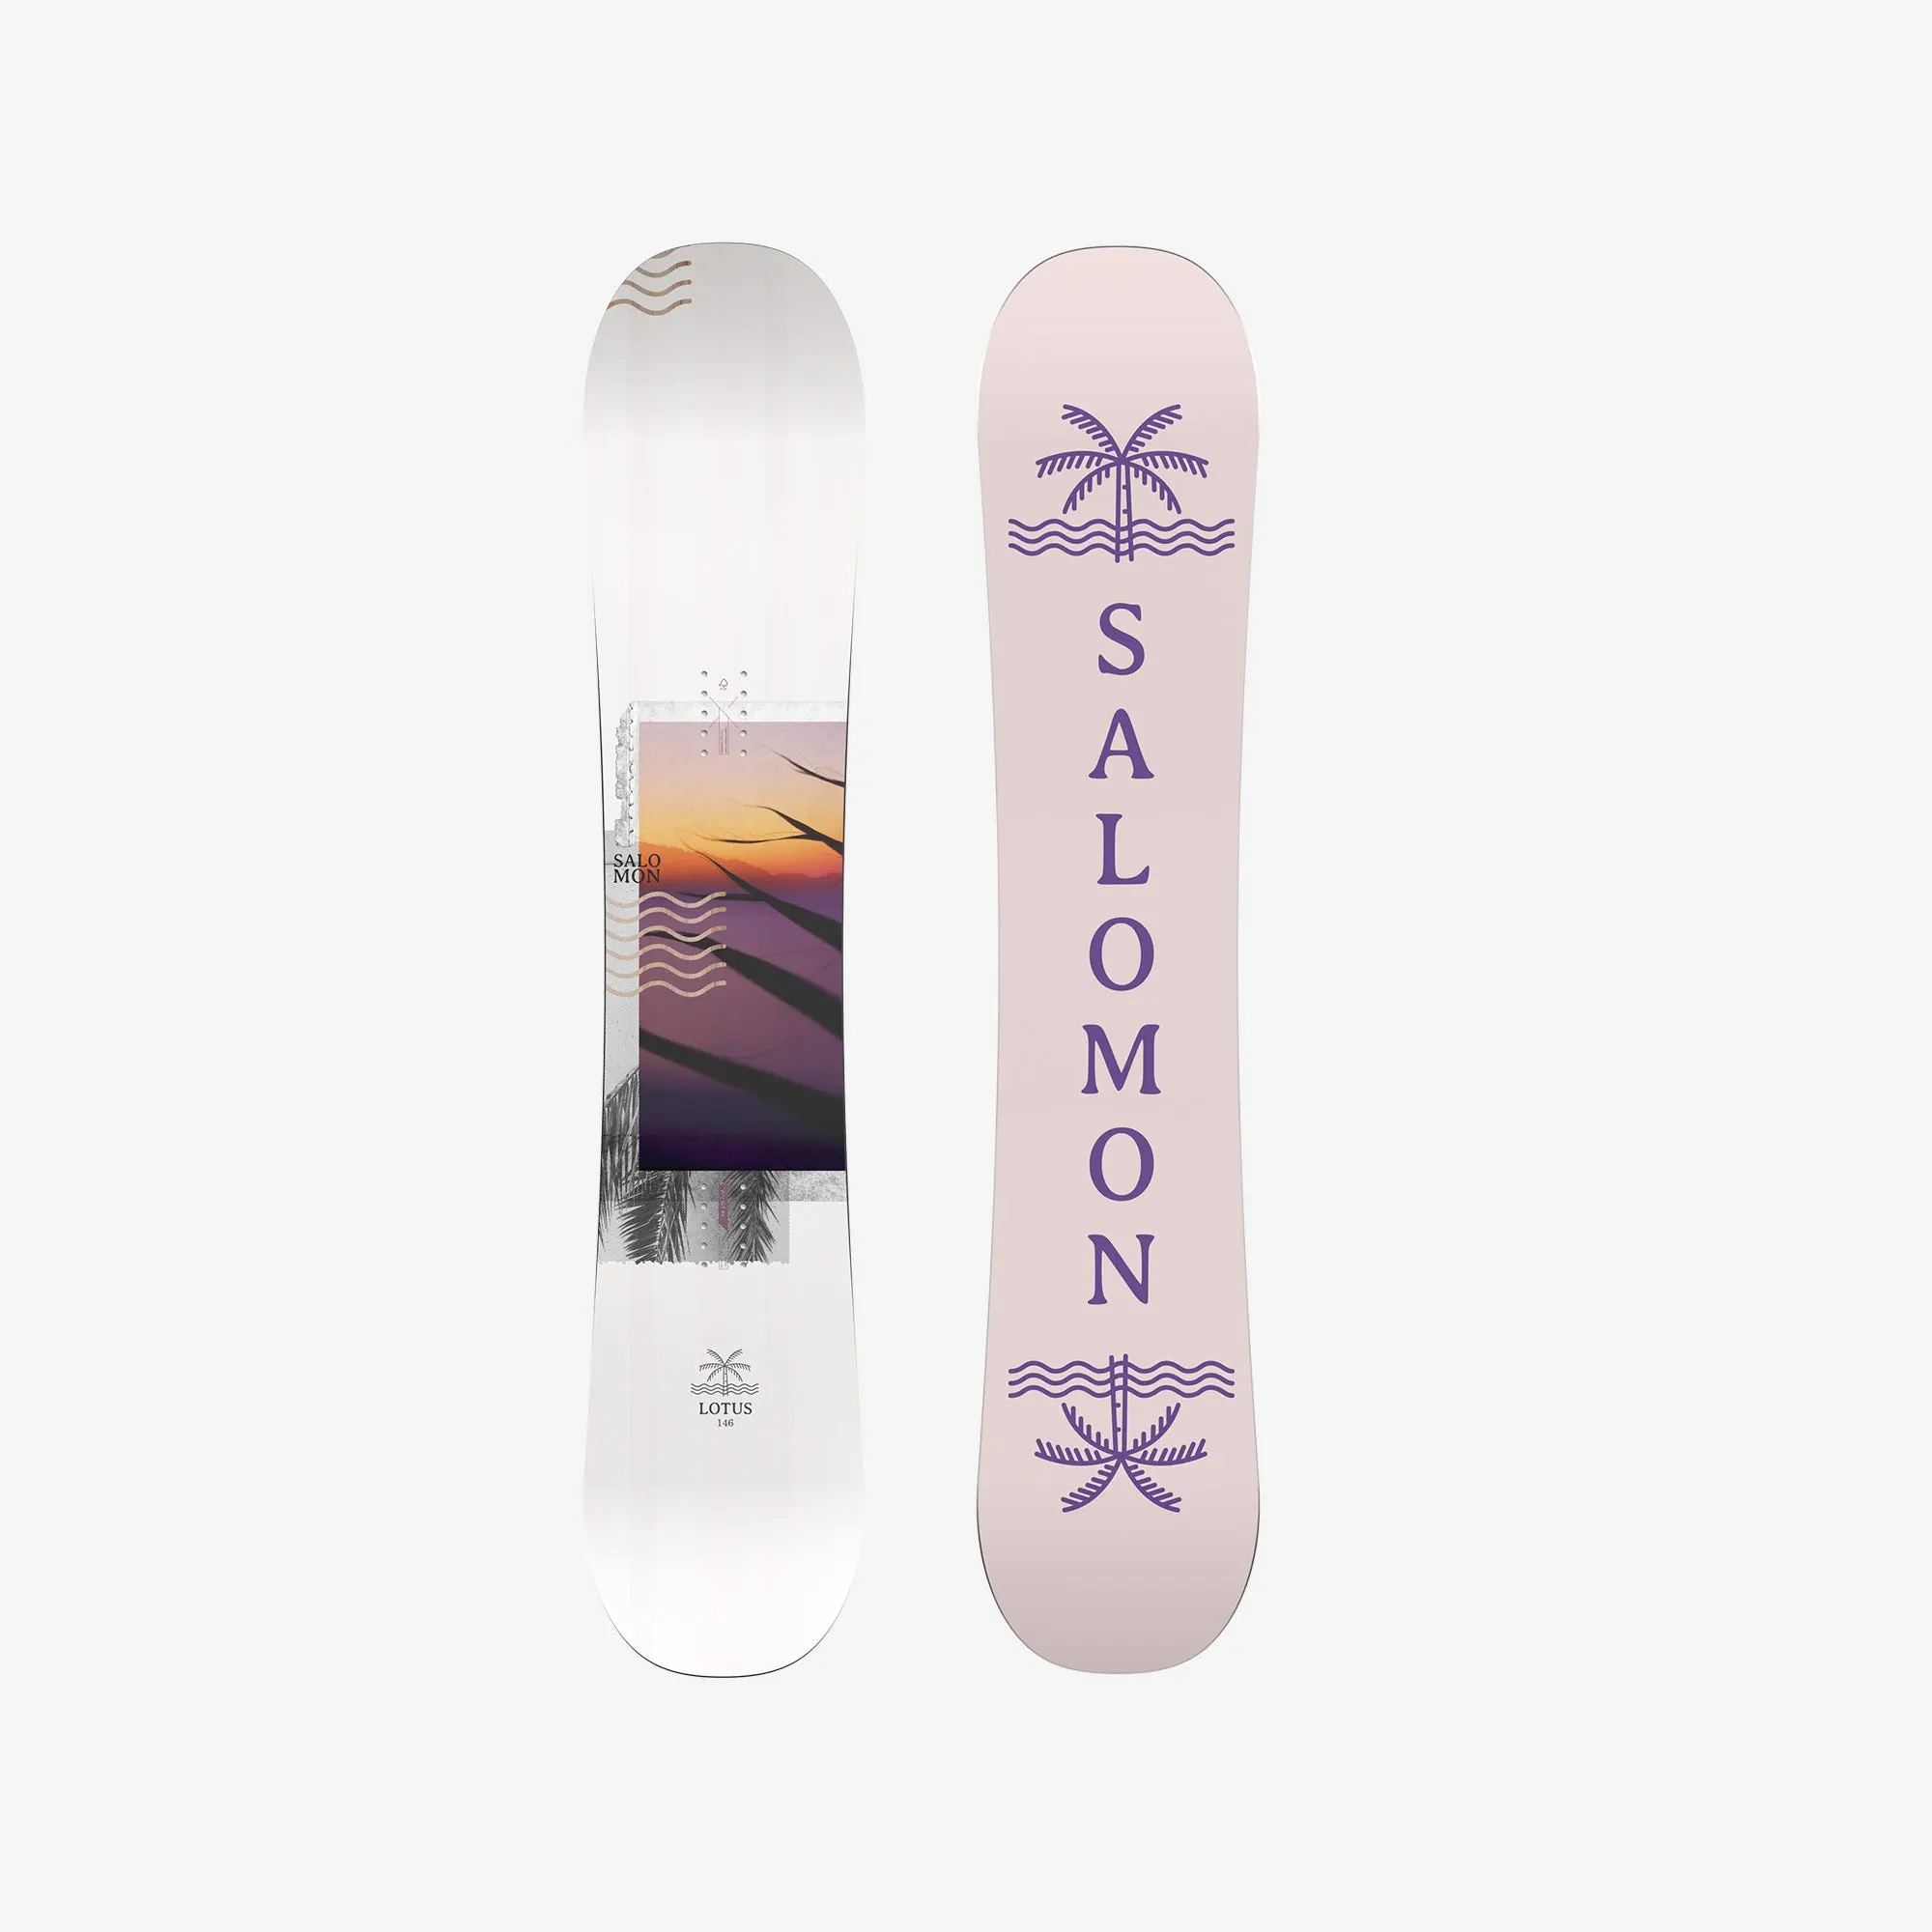 The Lotus snowboard features a soft flex and a forgiving profile, facilitating progression and lowering consequences for beginners. This directional twin features Bite Free Edges for a catch free ride.